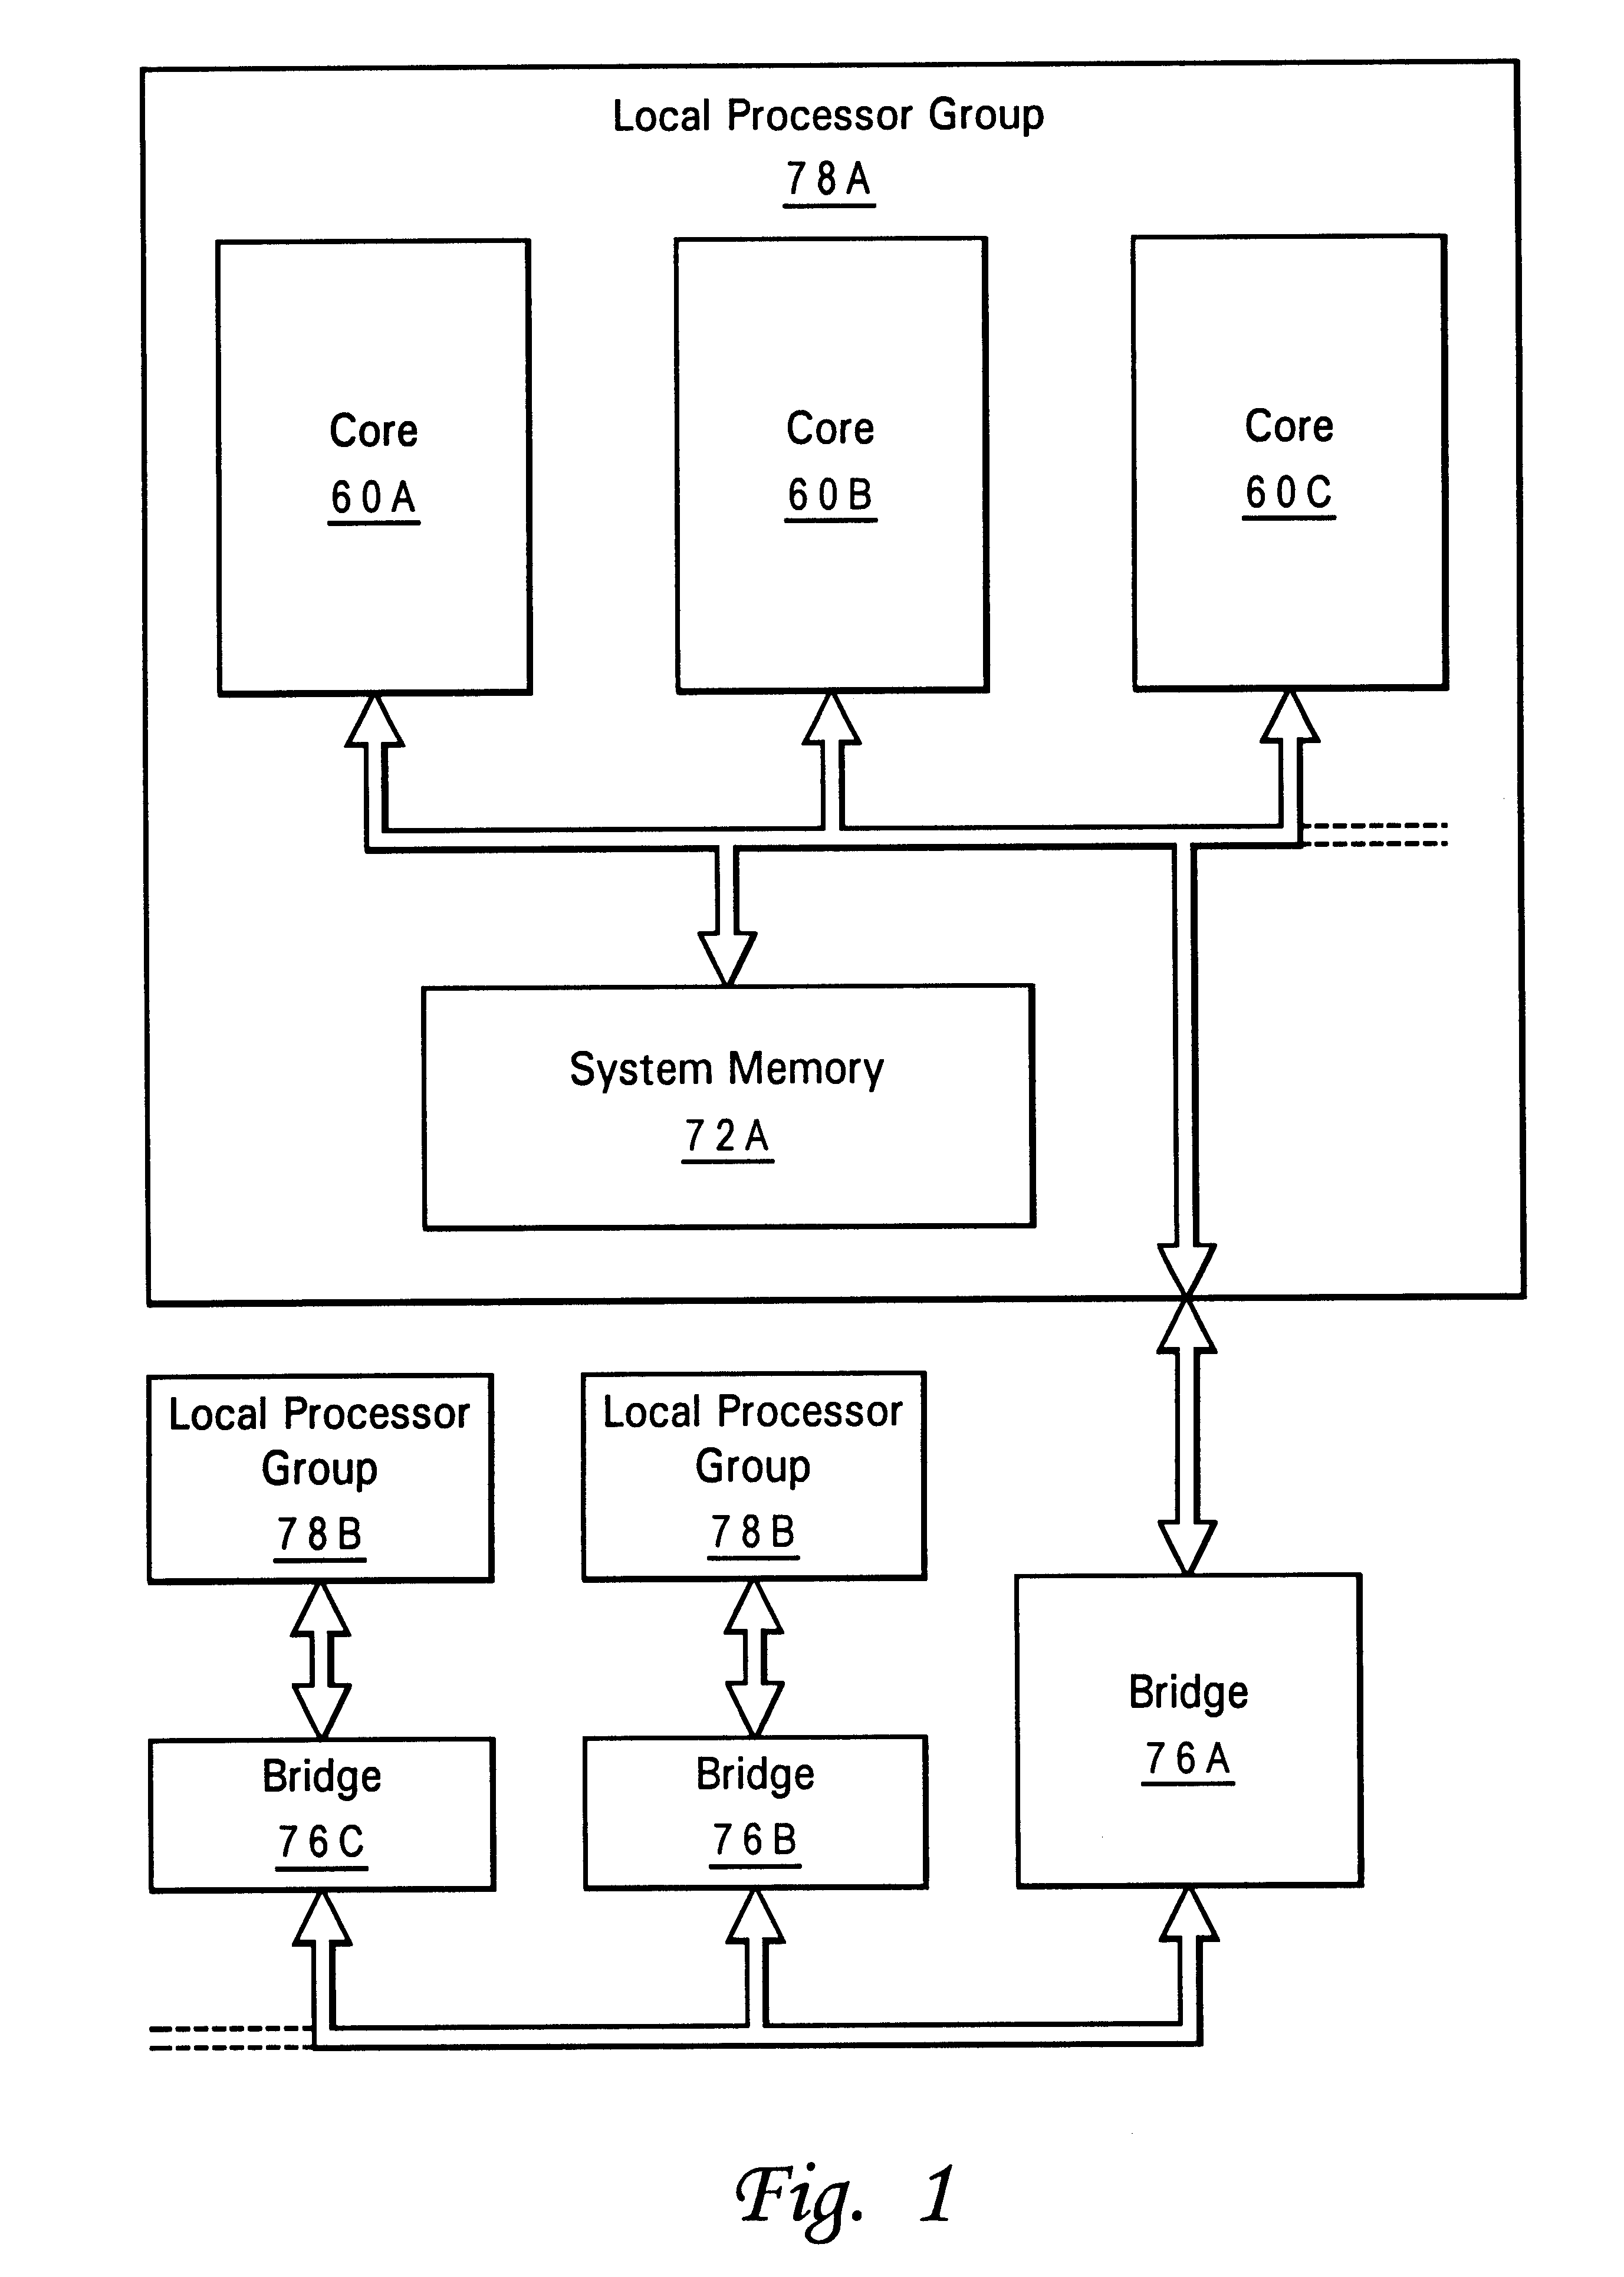 Method and system for maintaining allocation information on data castout from an upper level cache